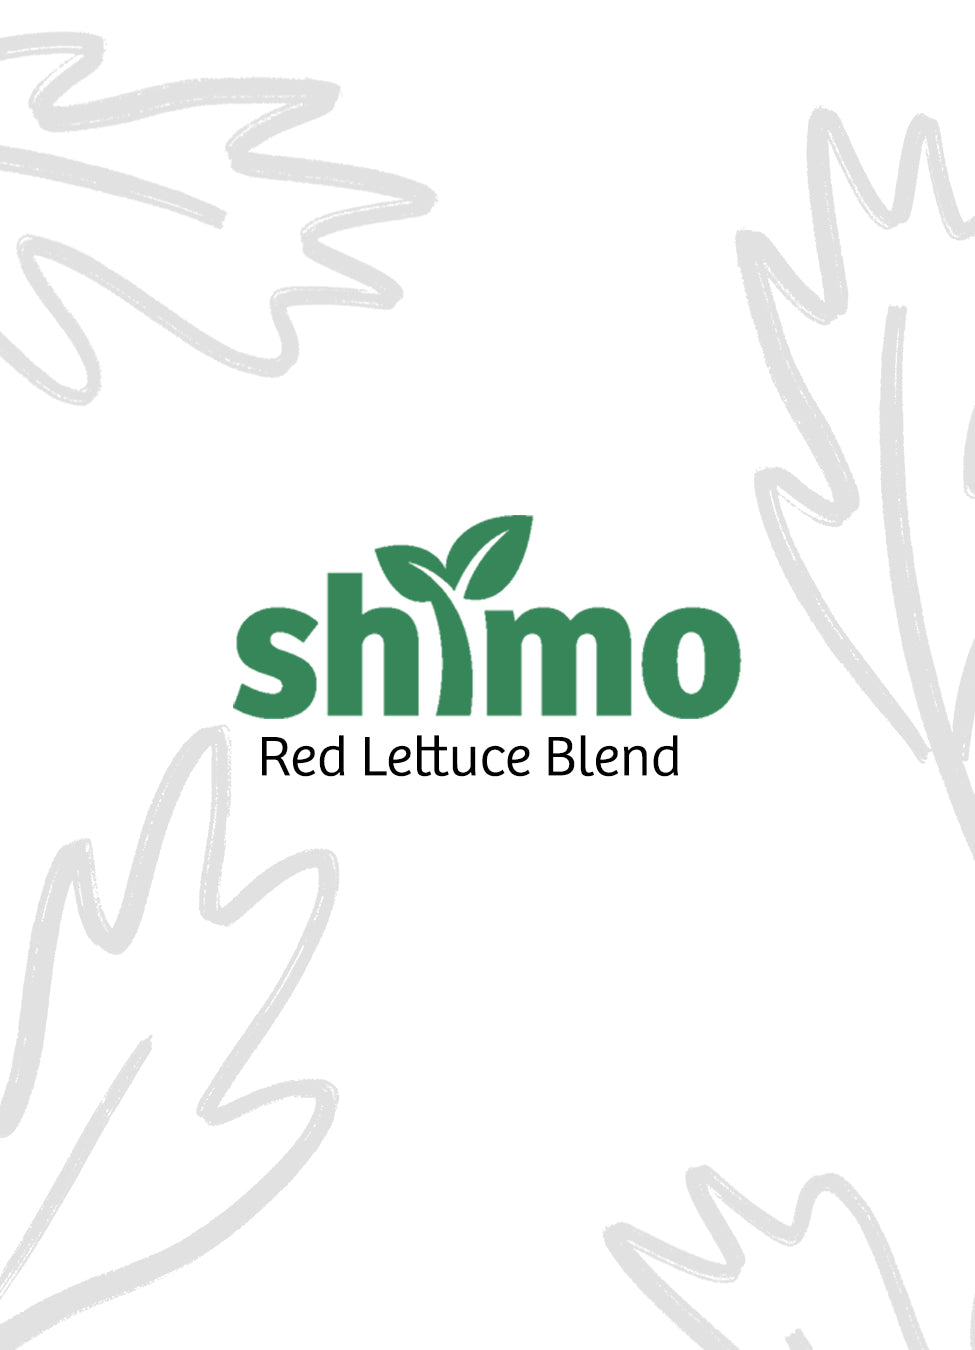 Shimo Red Lettuce Blend Seed Packet